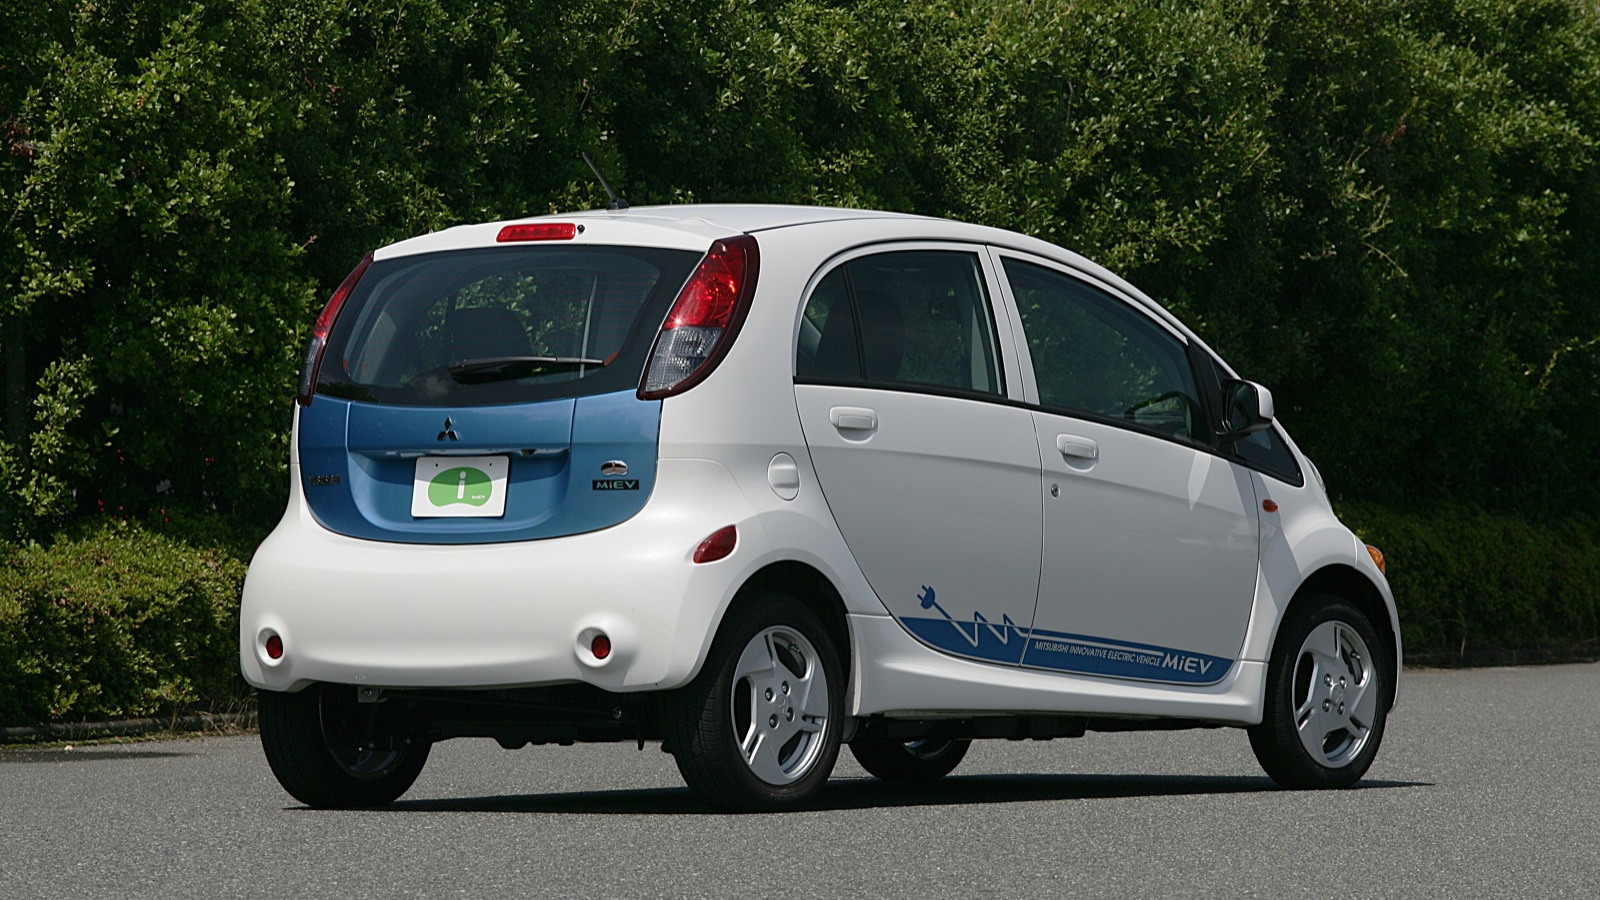 2012 Mitsubishi i Ranked By EPA As Most Efficient Electric Car On Sale